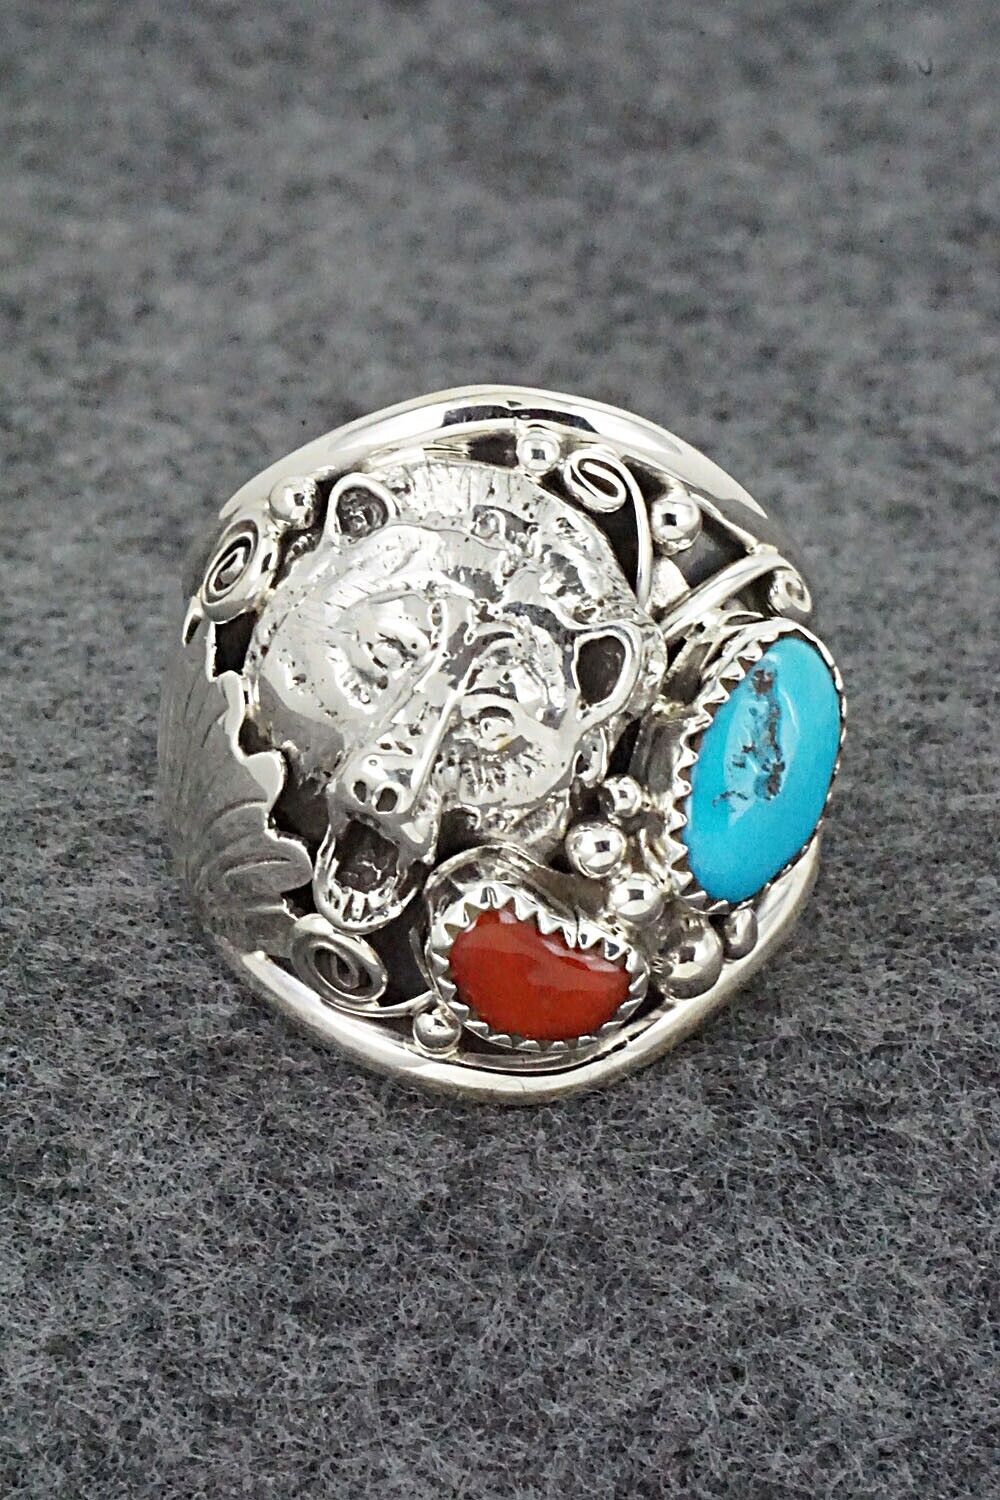 Turquoise, Coral & Sterling Silver Ring - Jeannette Saunders - Size 14